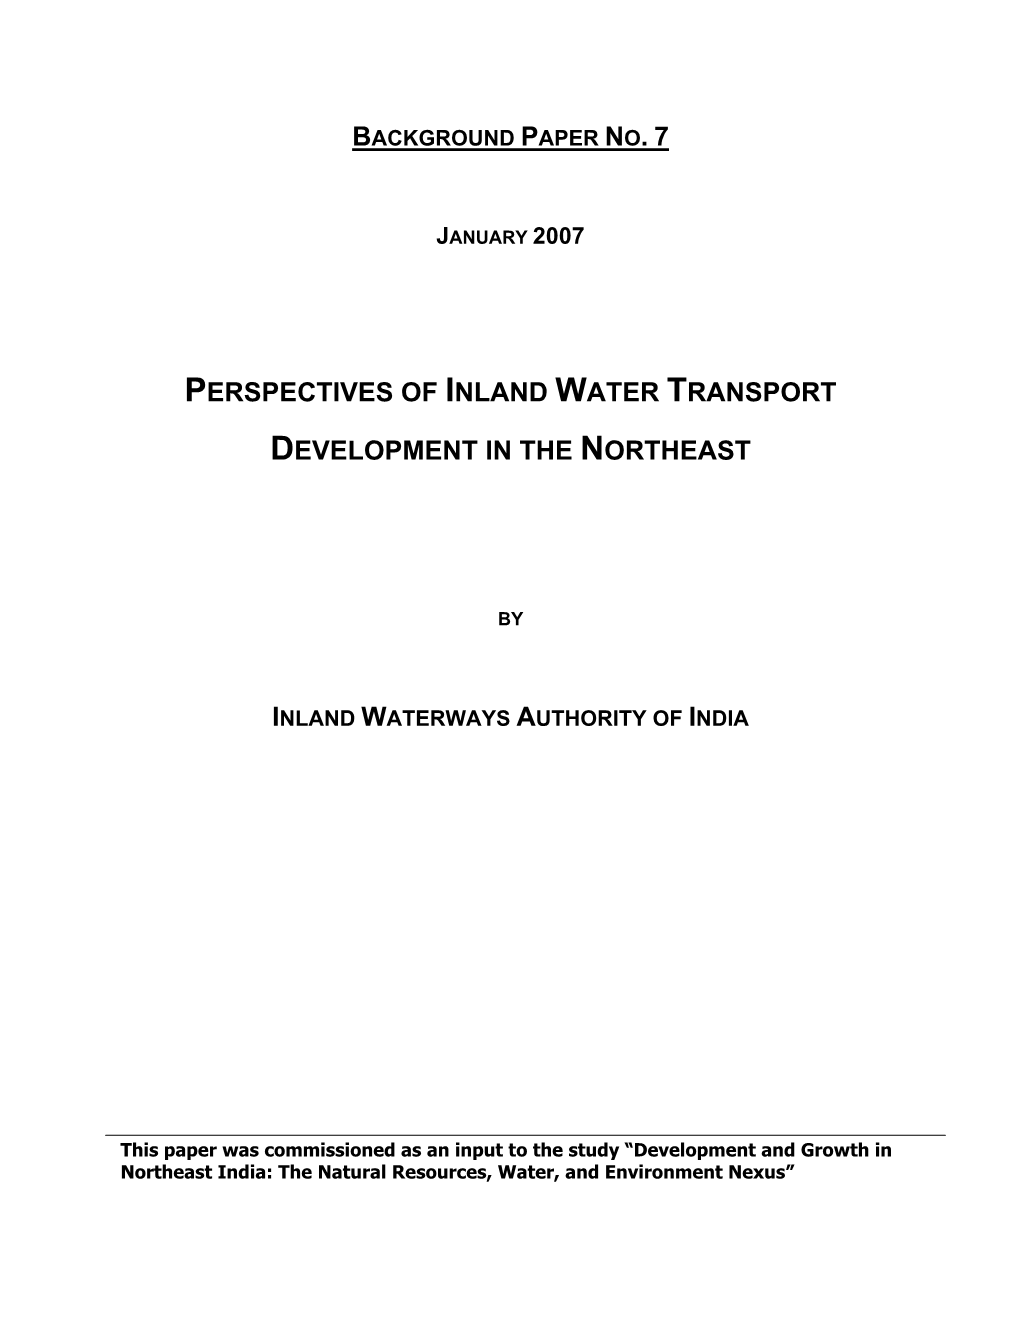 Perspectives of Inland Water Transport Development In